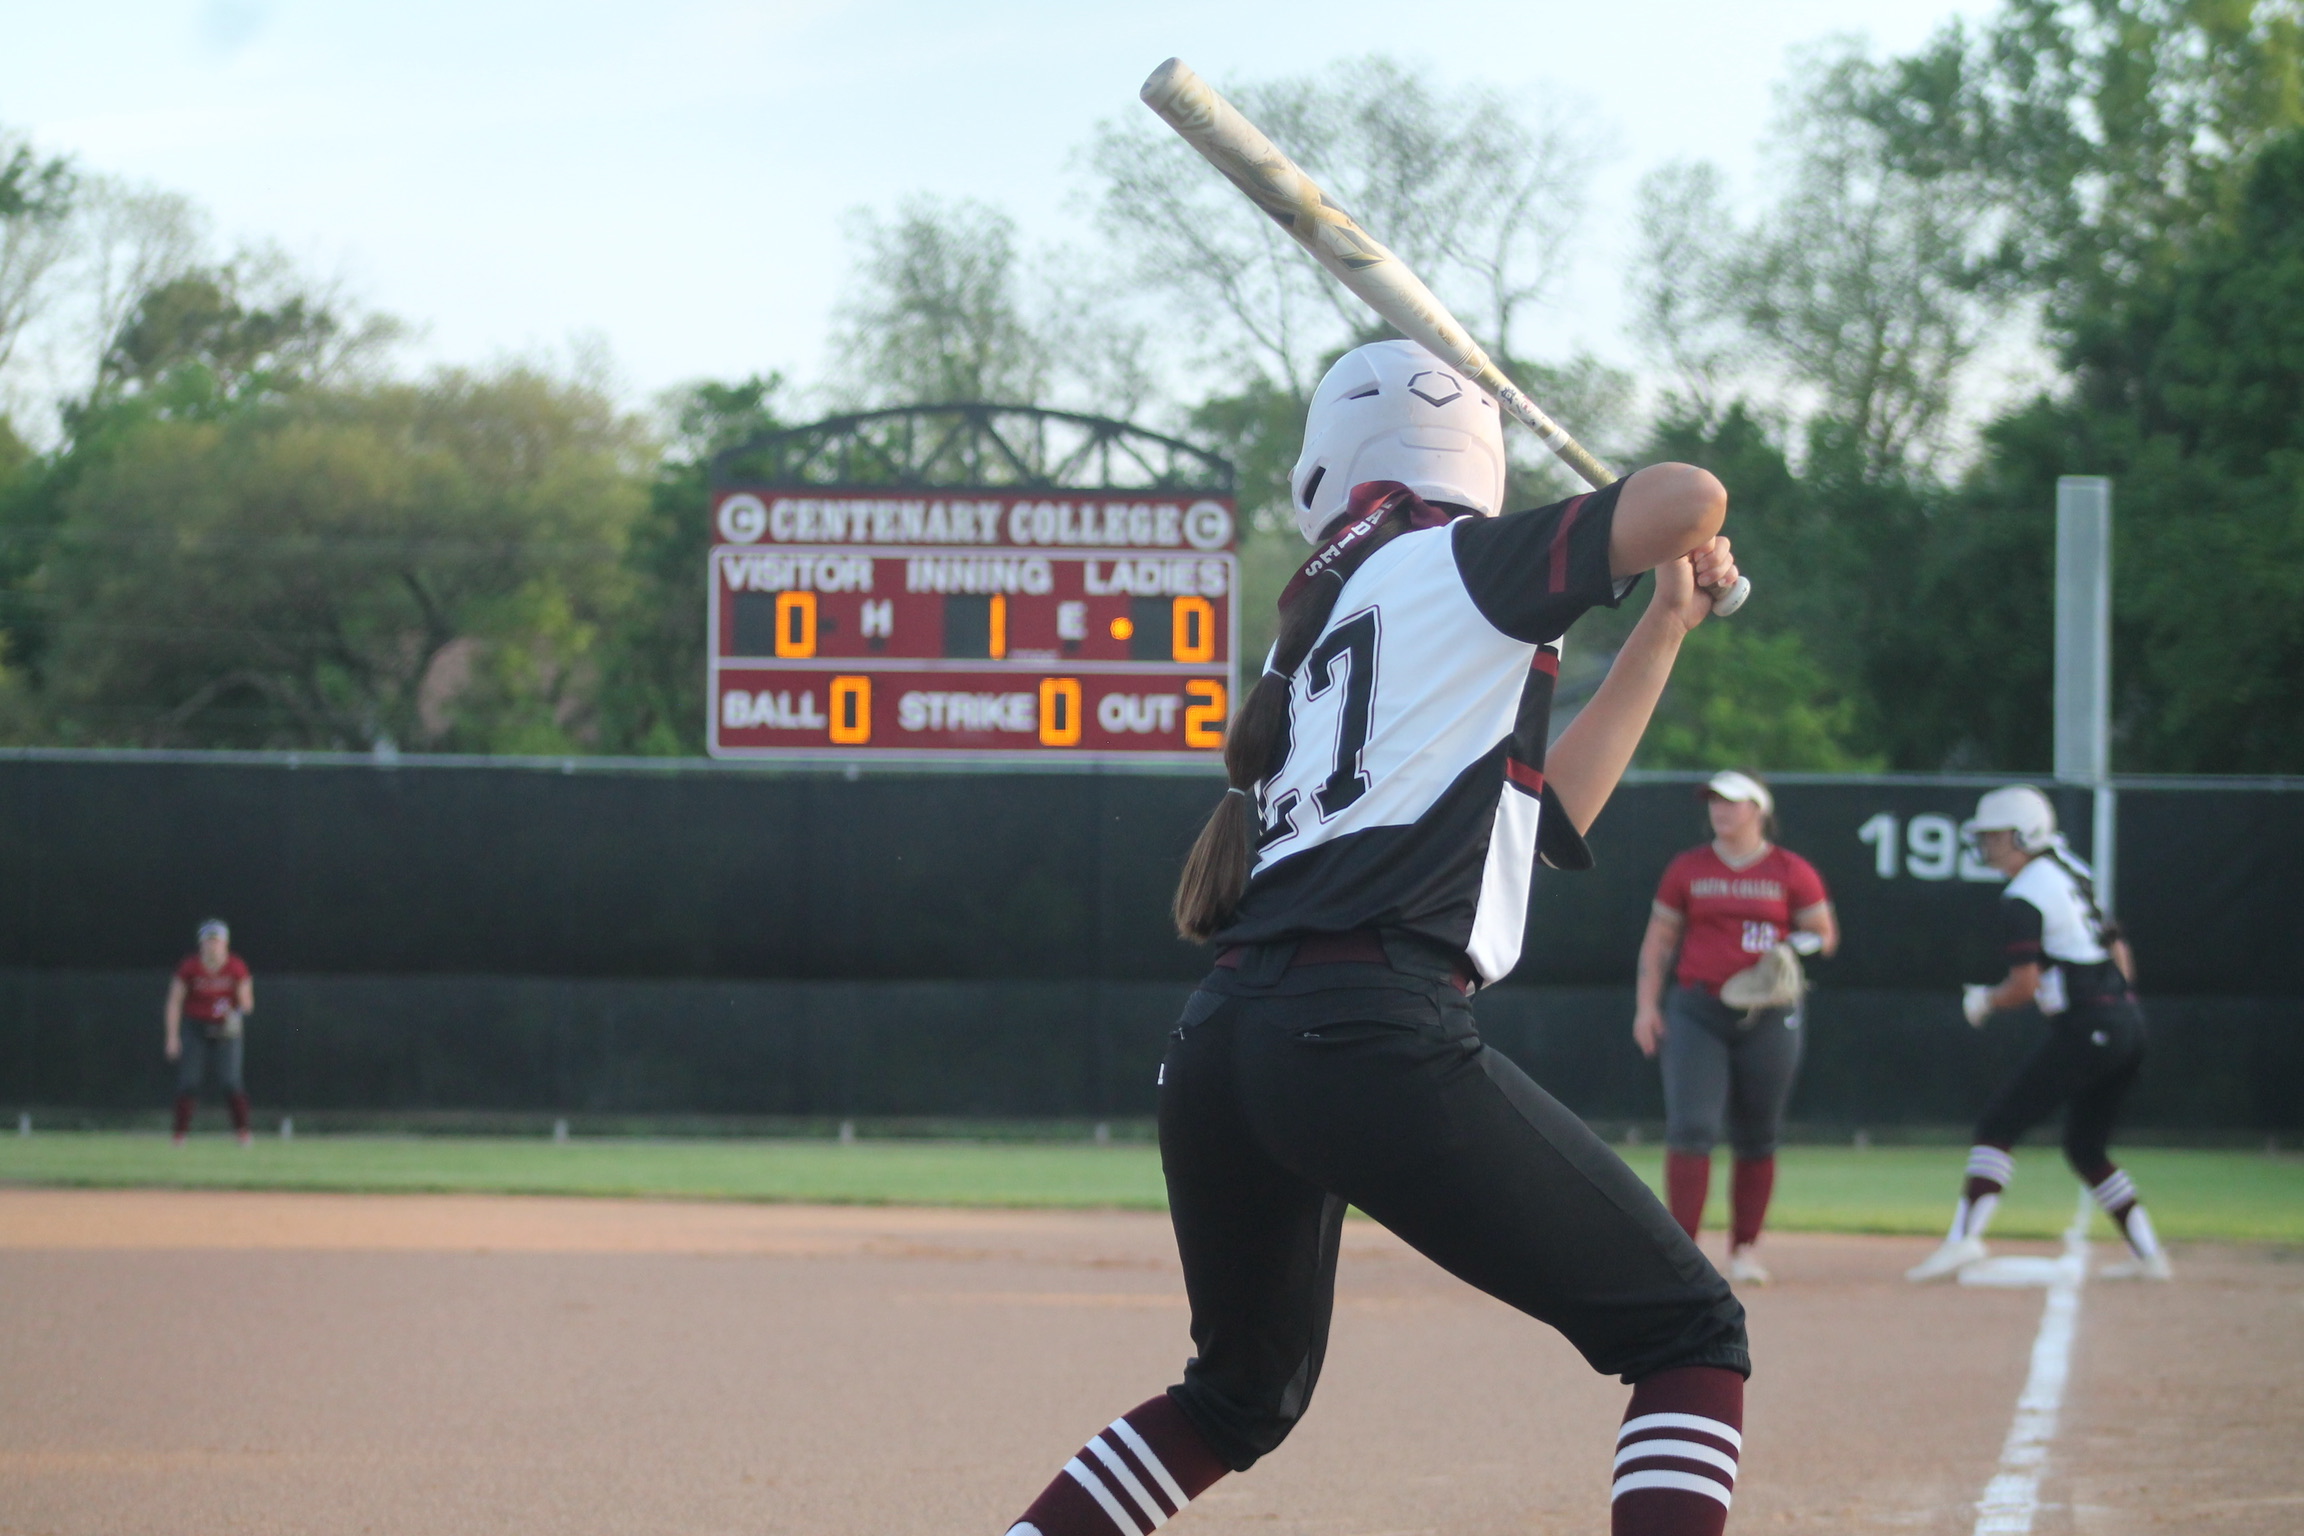 Senior IB Isabelle Dominguez tied her career single-game high with four RBI in game two of Saturday's DH.